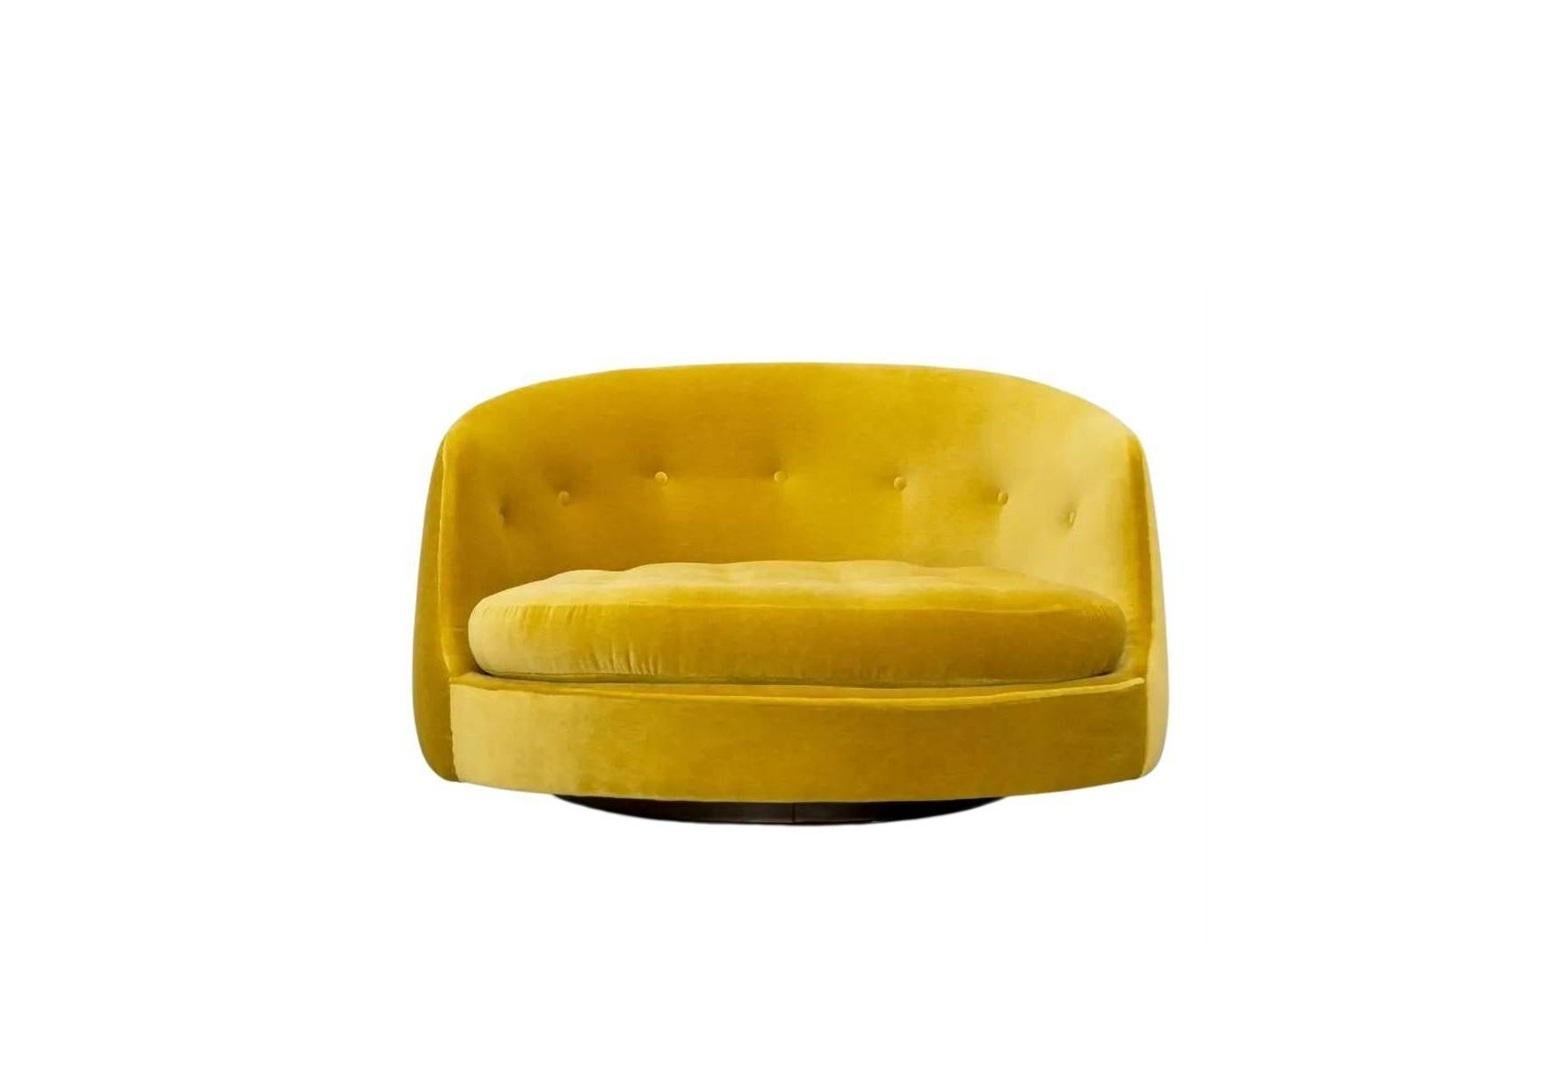 Stylish, elegant and timeless giant swivel tub chair model no. 3406 by American modernist Milo Baughman. His designs are forward-thinking and distinctive, yet unpretentious. This is a rare design that put milo baughman on the map with designers and